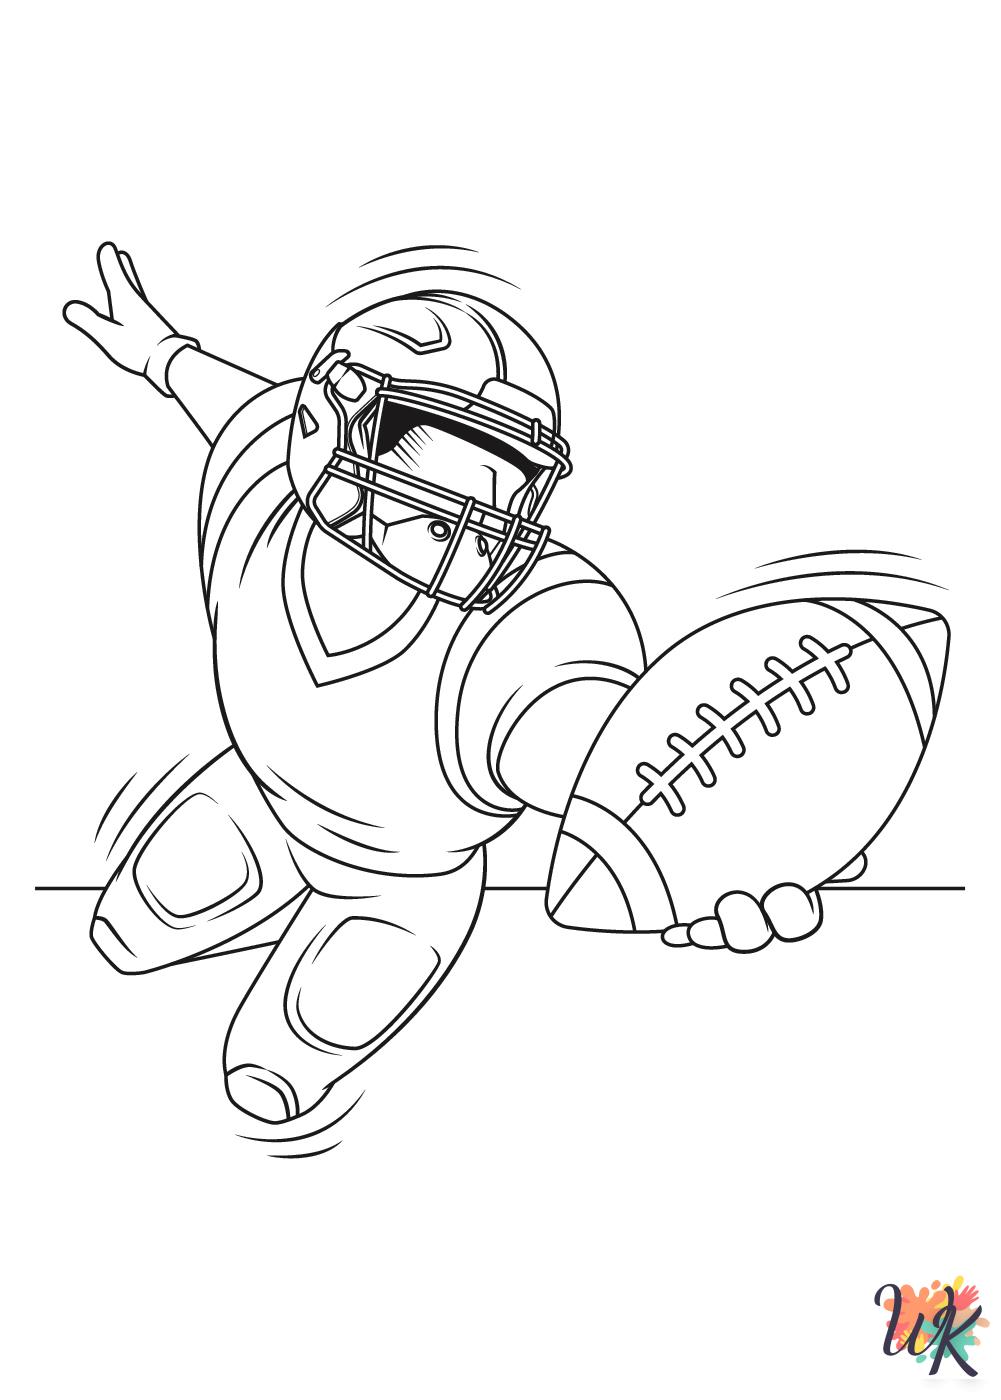 NFL coloring pages for adults easy 1